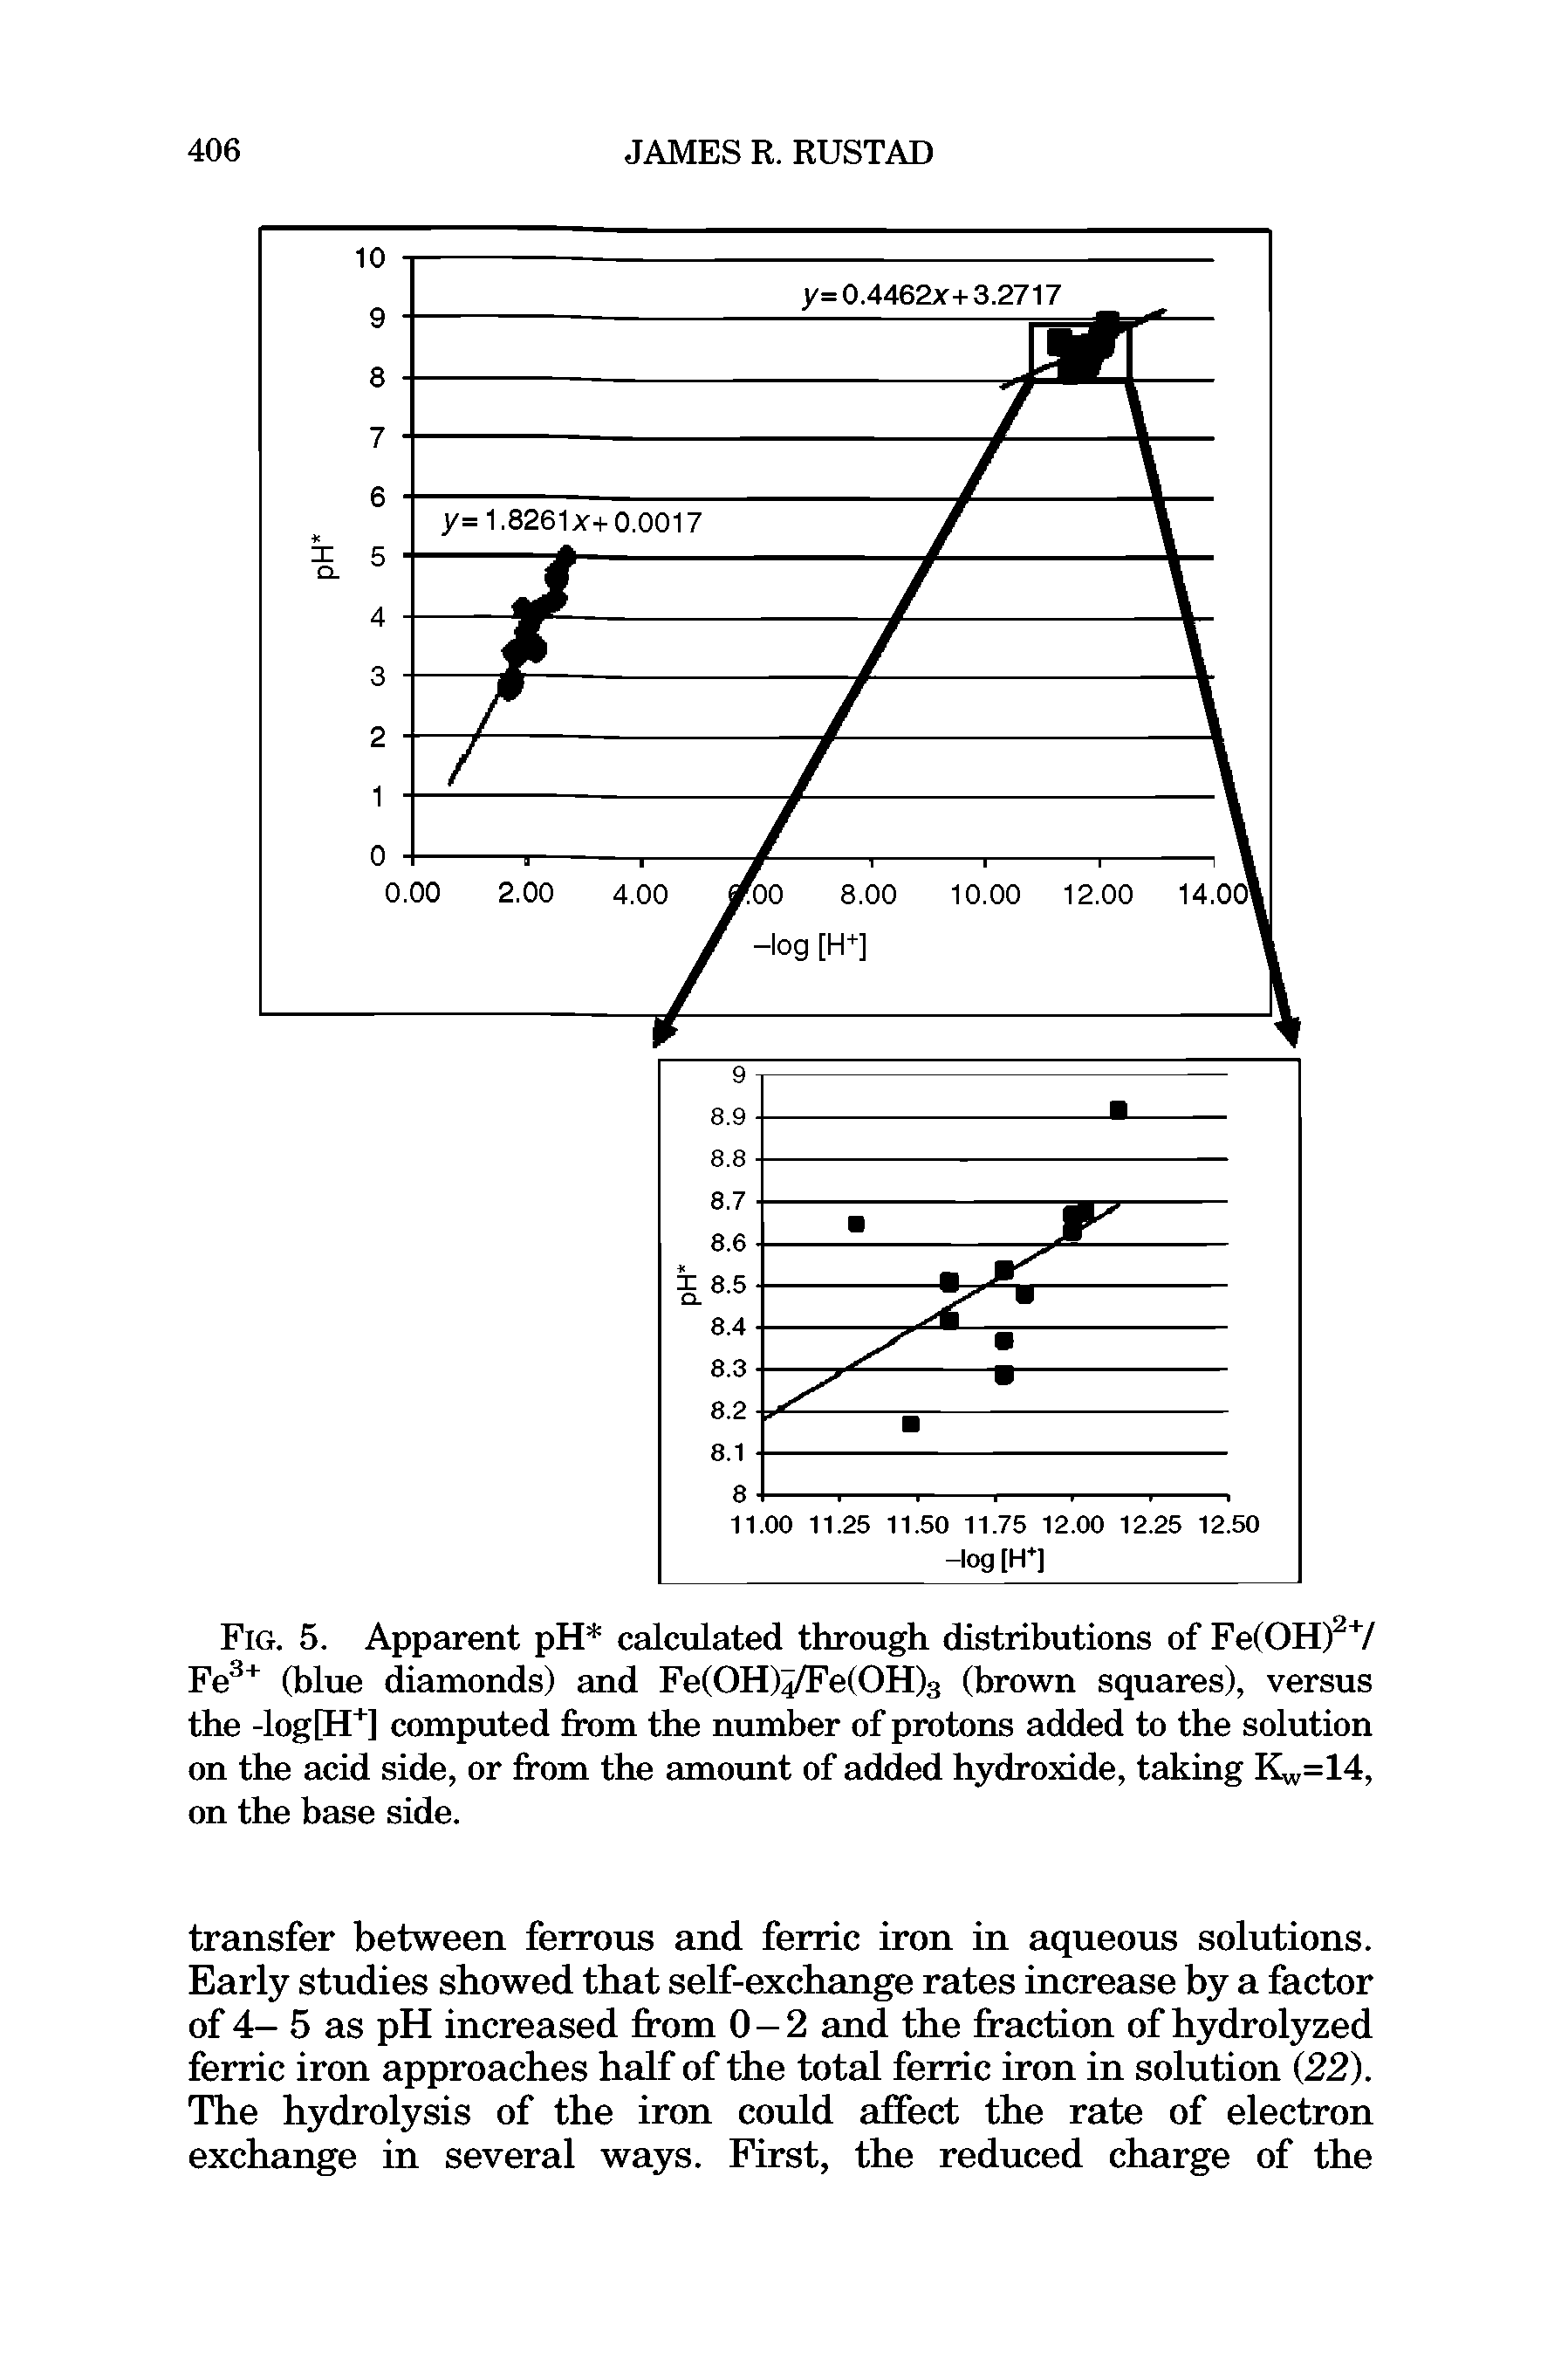 Fig. 5. Apparent pH calculated through distributions of Fe(OH)2+/ Fe3+ (blue diamonds) and Fe(0H) Fe(0H)3 (brown squares), versus the -log[H+] computed from the number of protons added to the solution on the acid side, or from the amount of added hydroxide, taking Kw=14, on the base side.